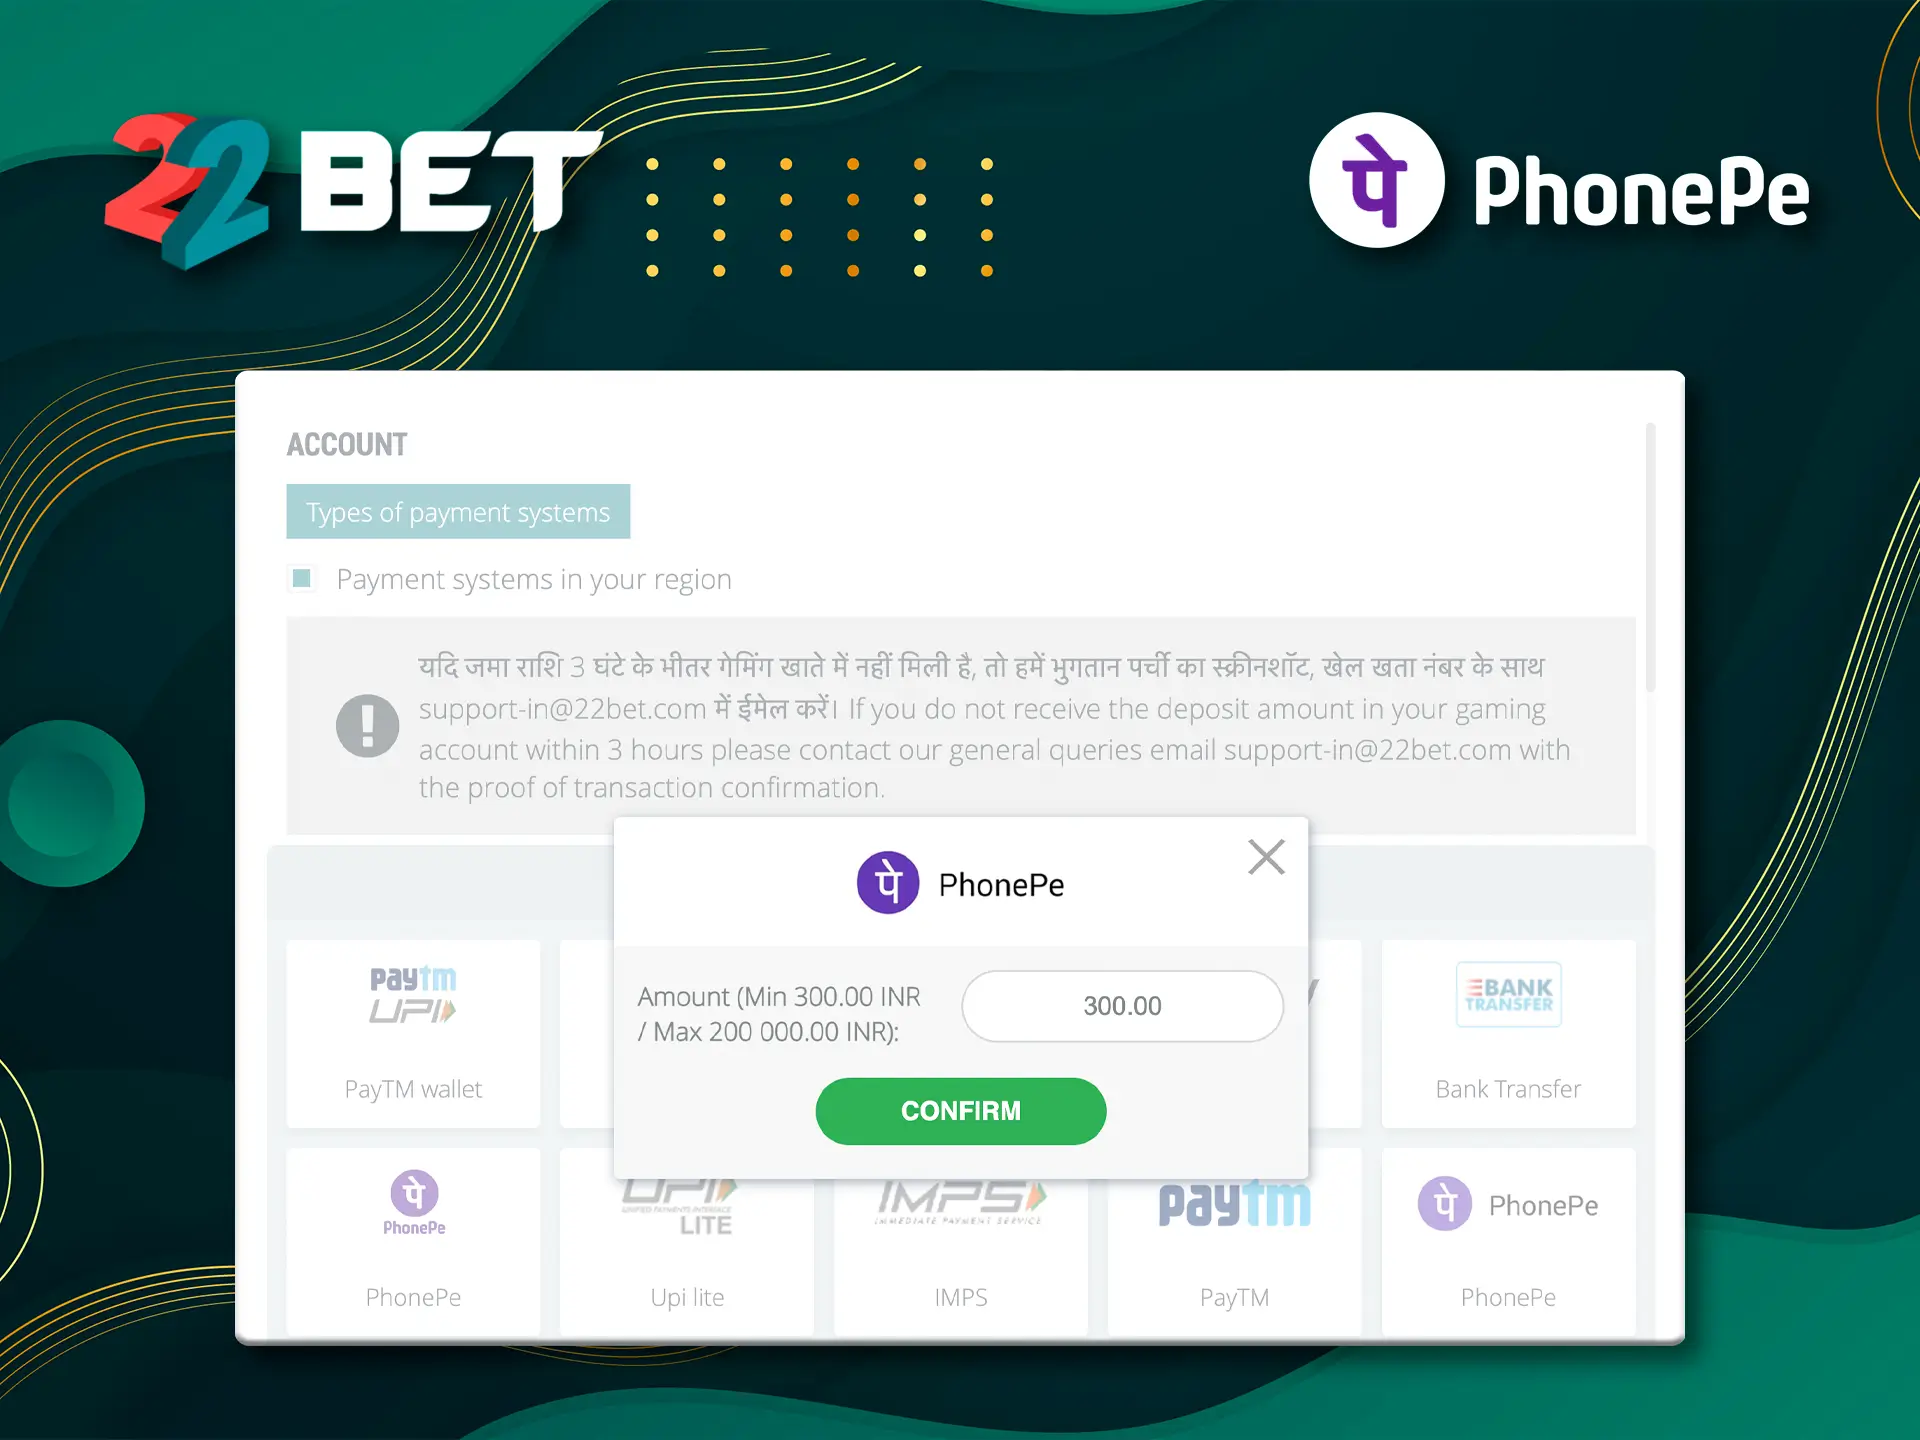 22Bet is a well-known casino with a big name and the ability to withdraw via PhonePe.